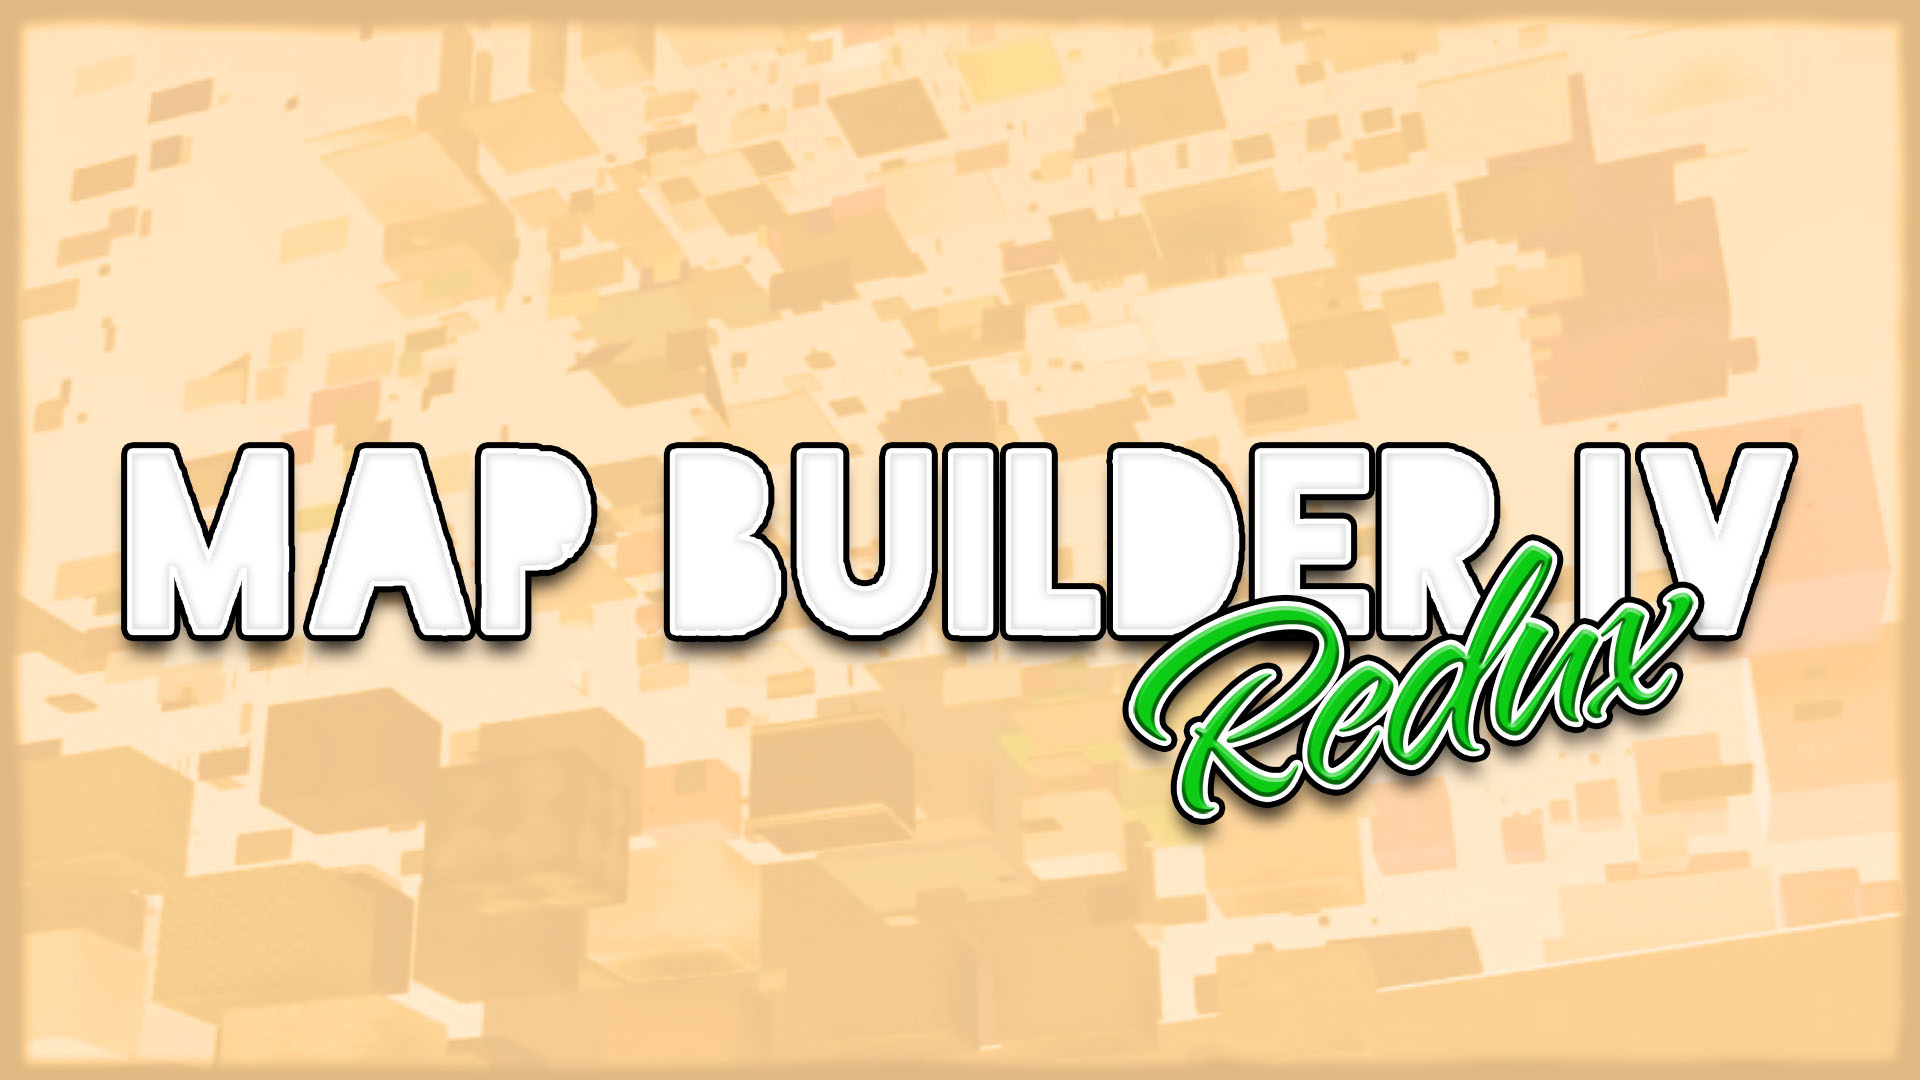 Map Builder. Builder's Patch. Map builder discovery